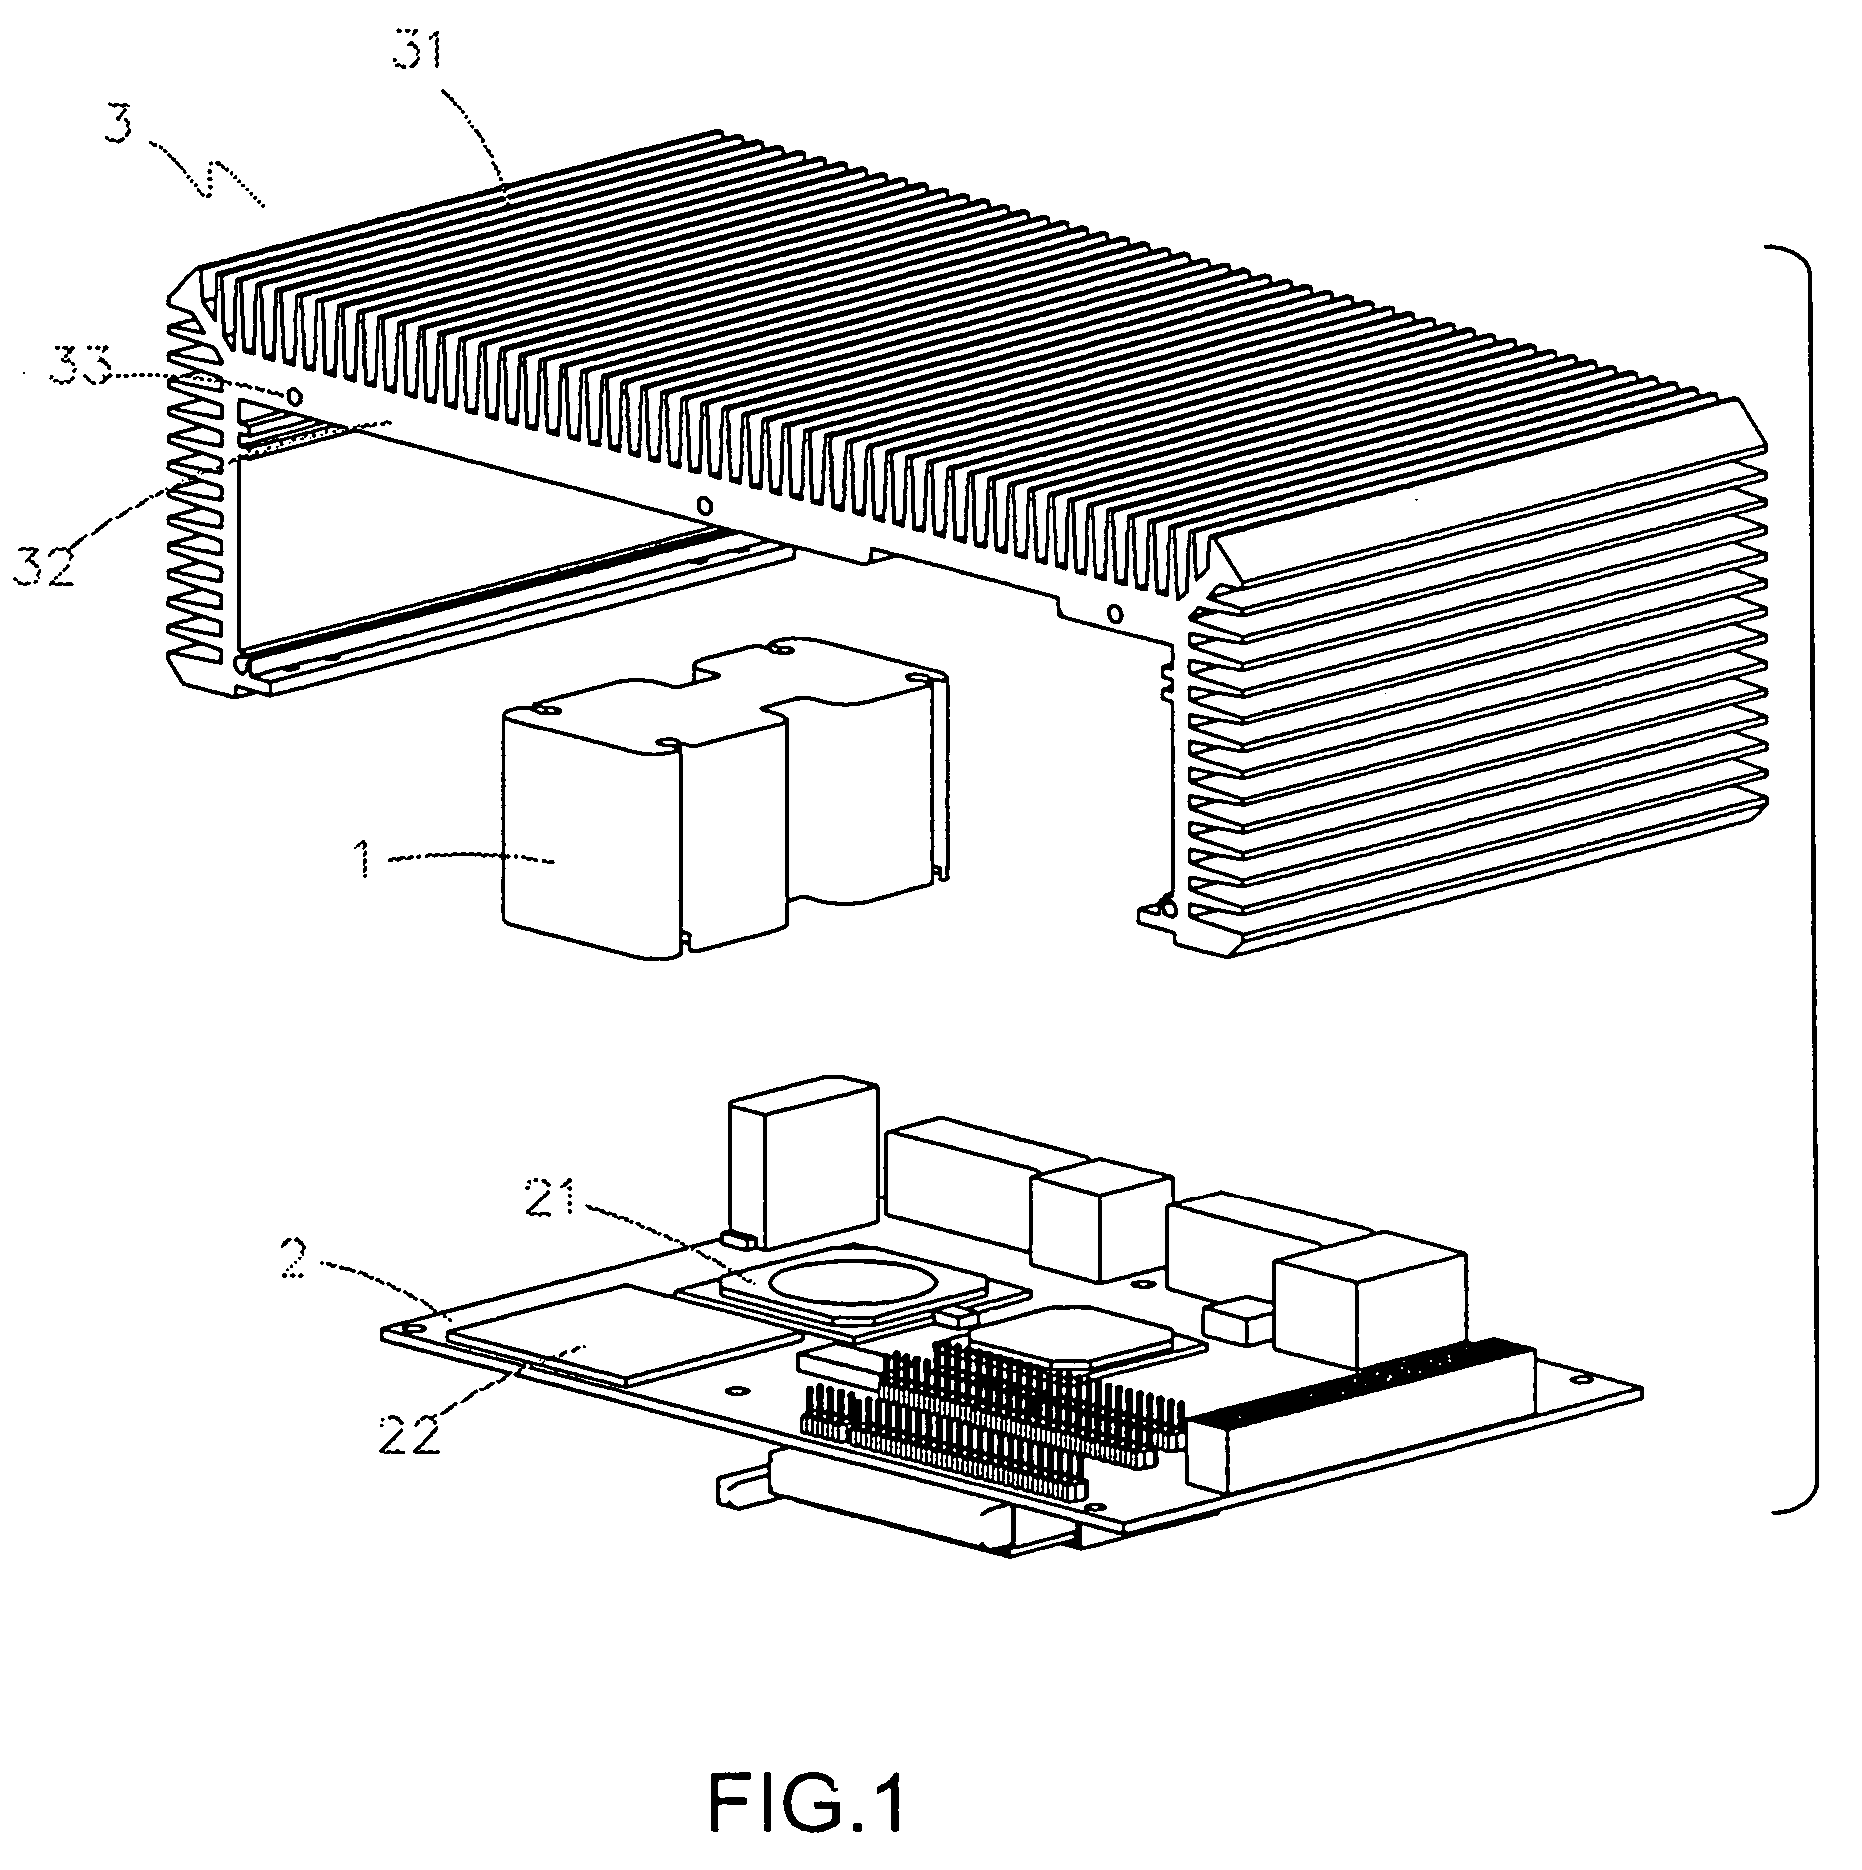 Industrial computer with aluminum case having fins as radiating device